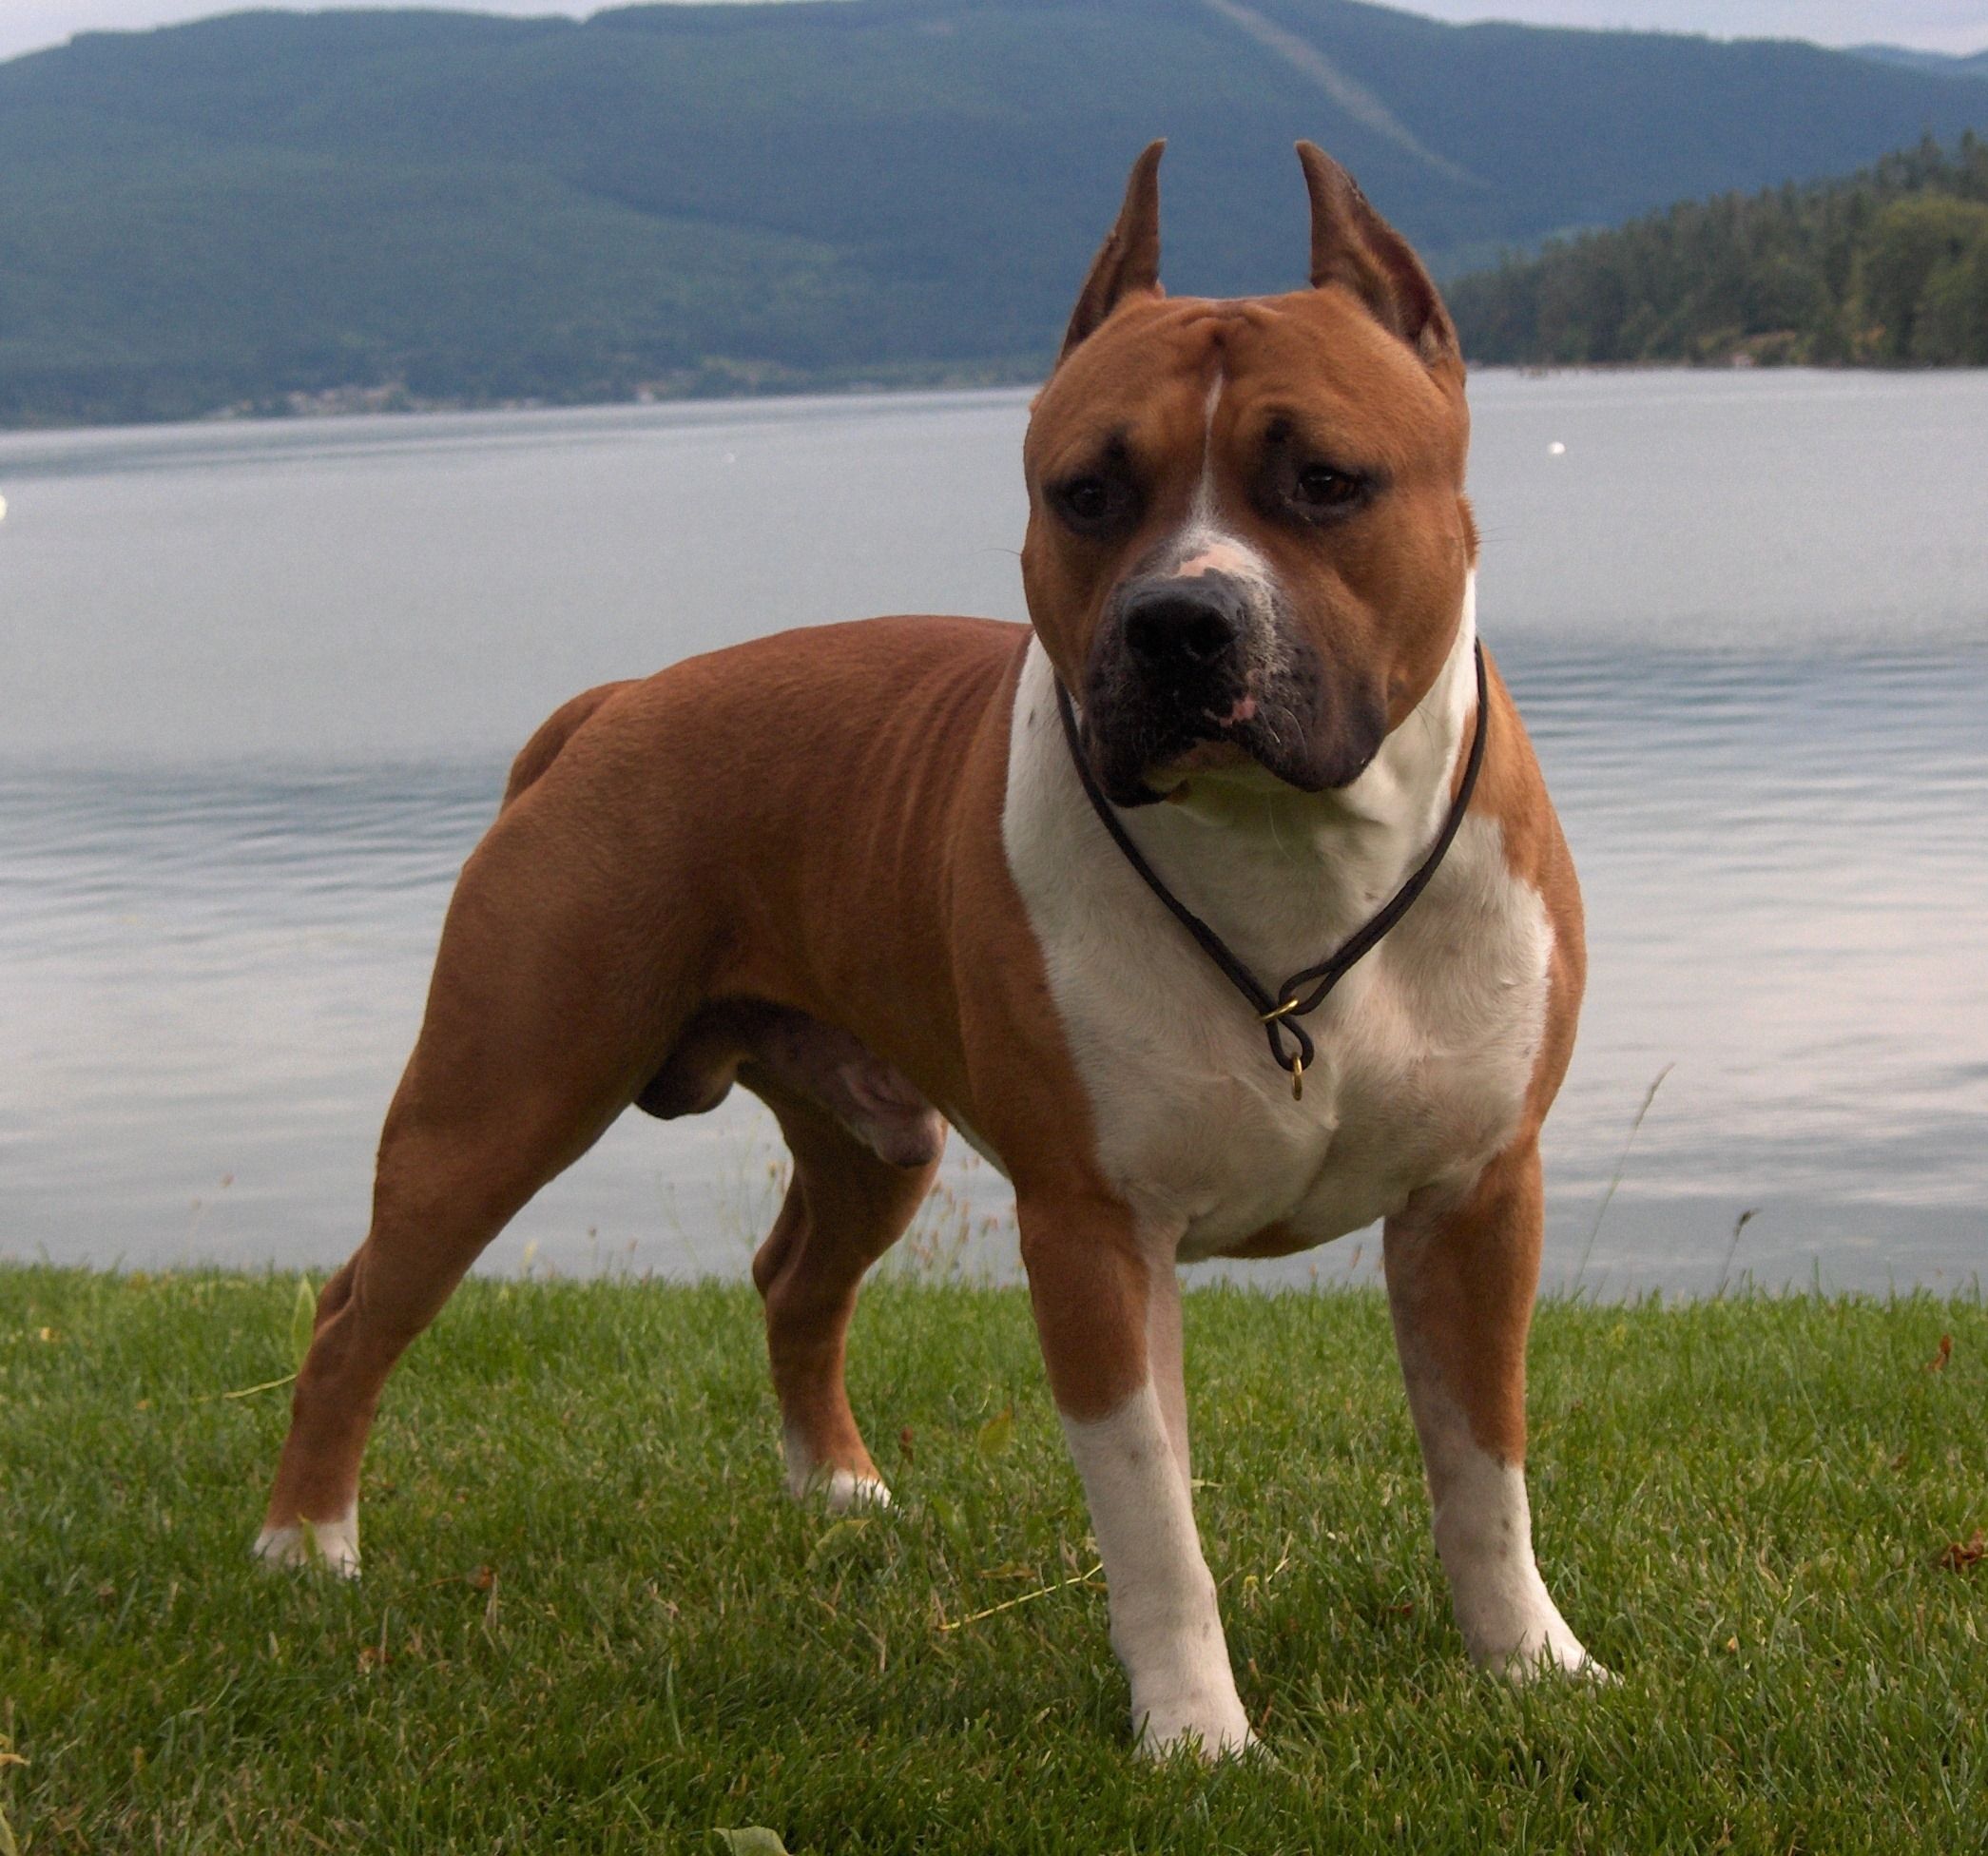 American Staffordshire Terrier Breed Info, Care and Wallpaper